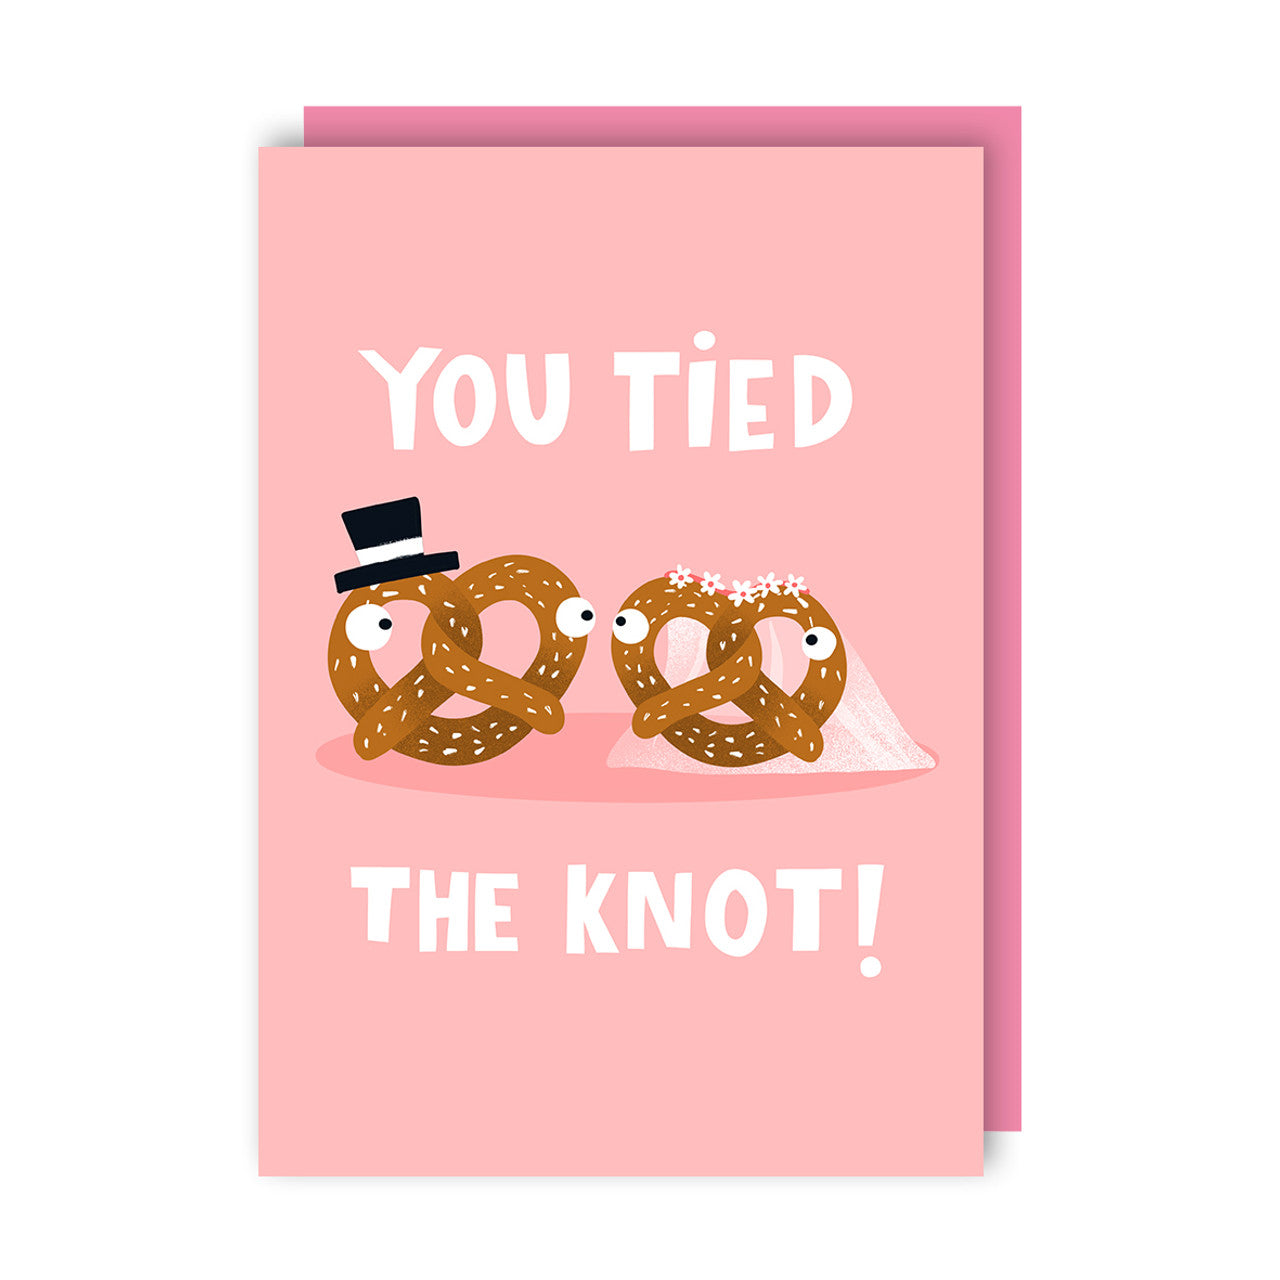 Wedding Card text reads "You tied the knot!"